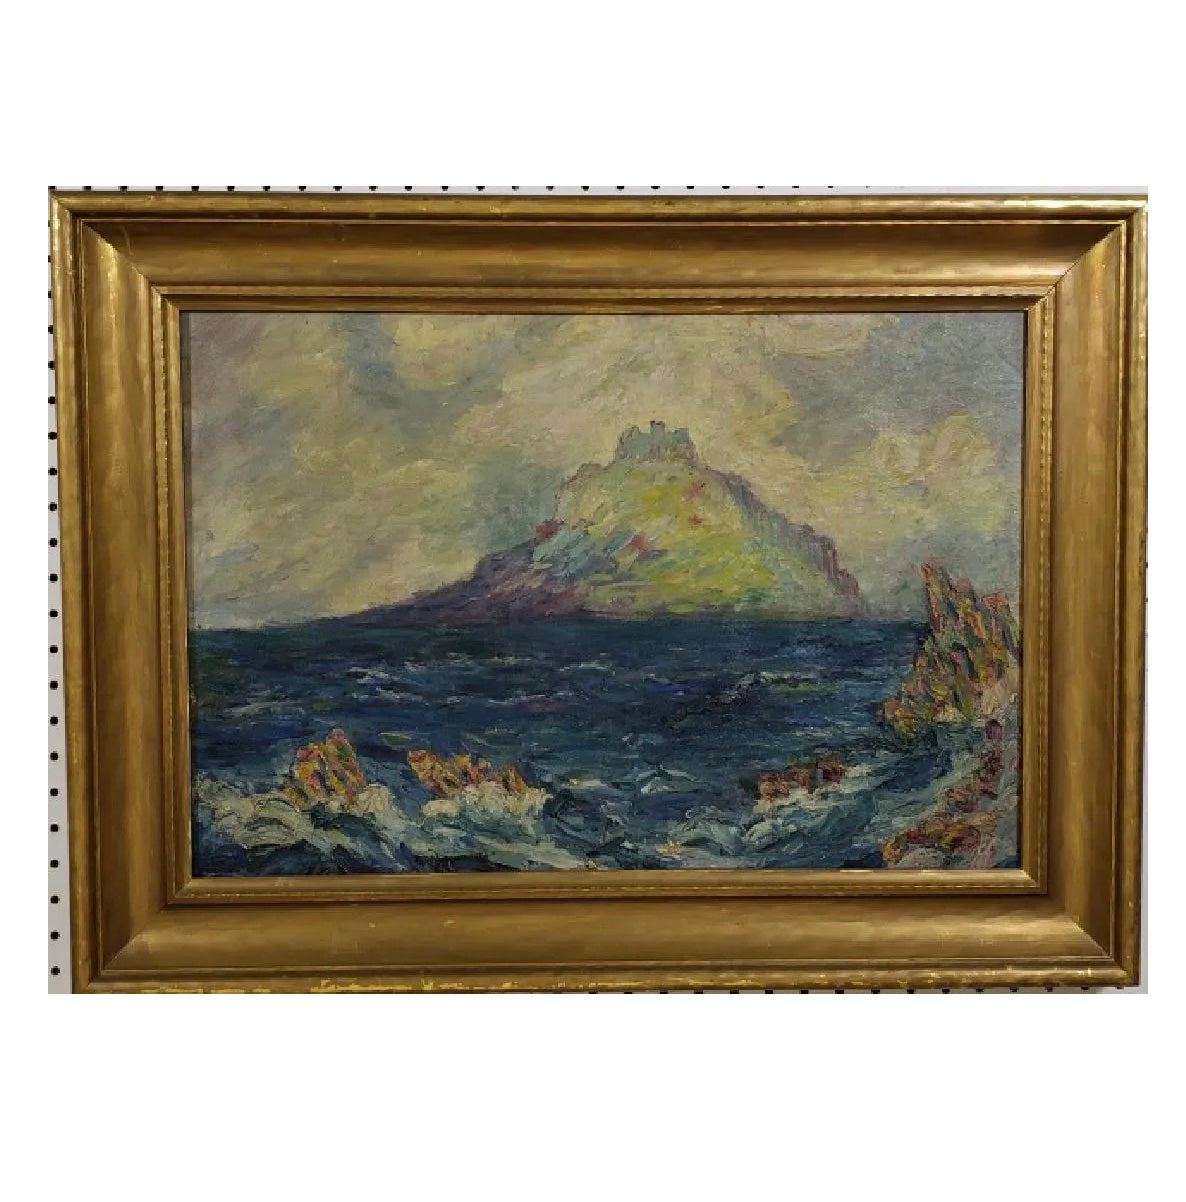 ABirger Sandzen, In The Style Of - Island Seascape - Early 20th C - Oil on Canvas Painting | Work of Man